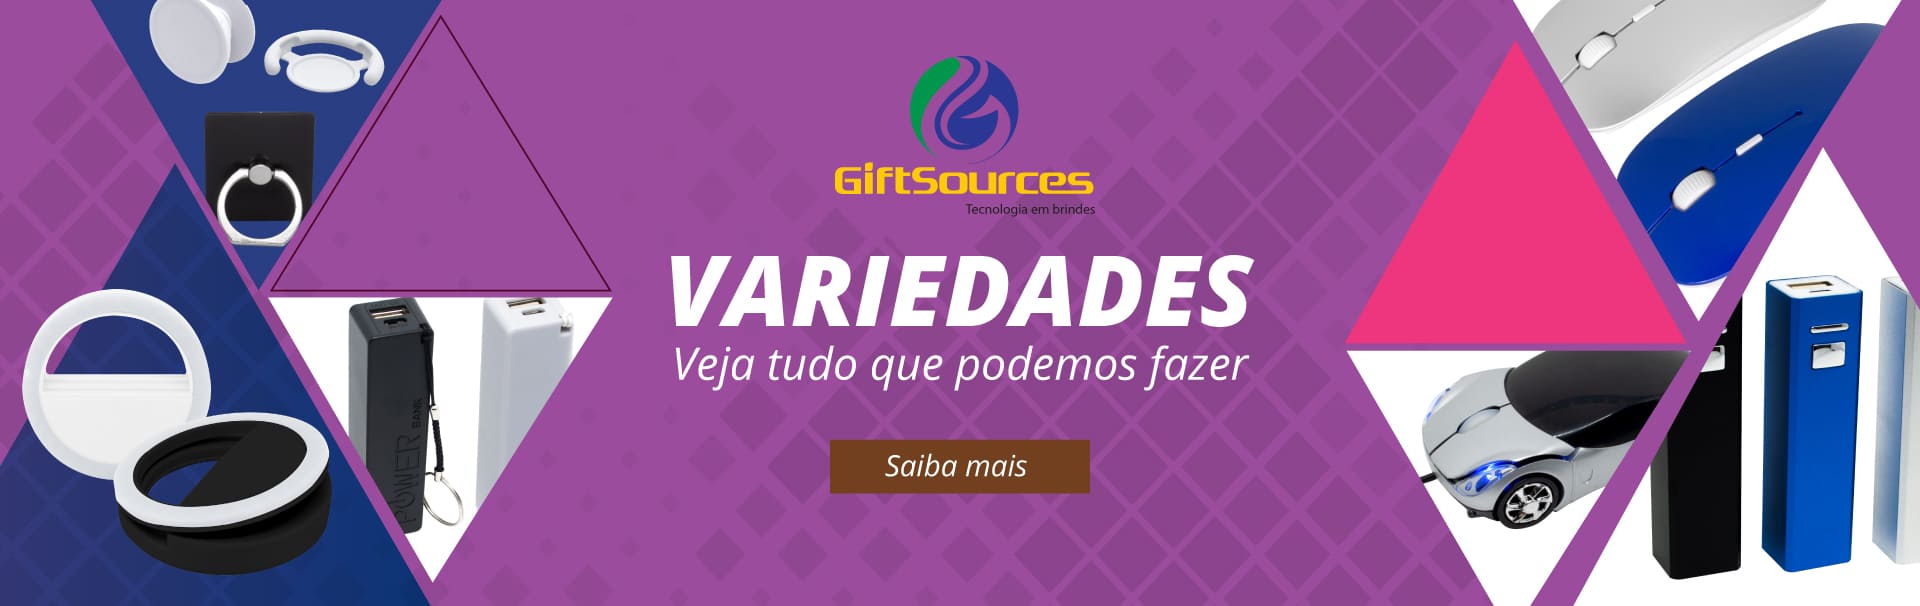 Giftsources